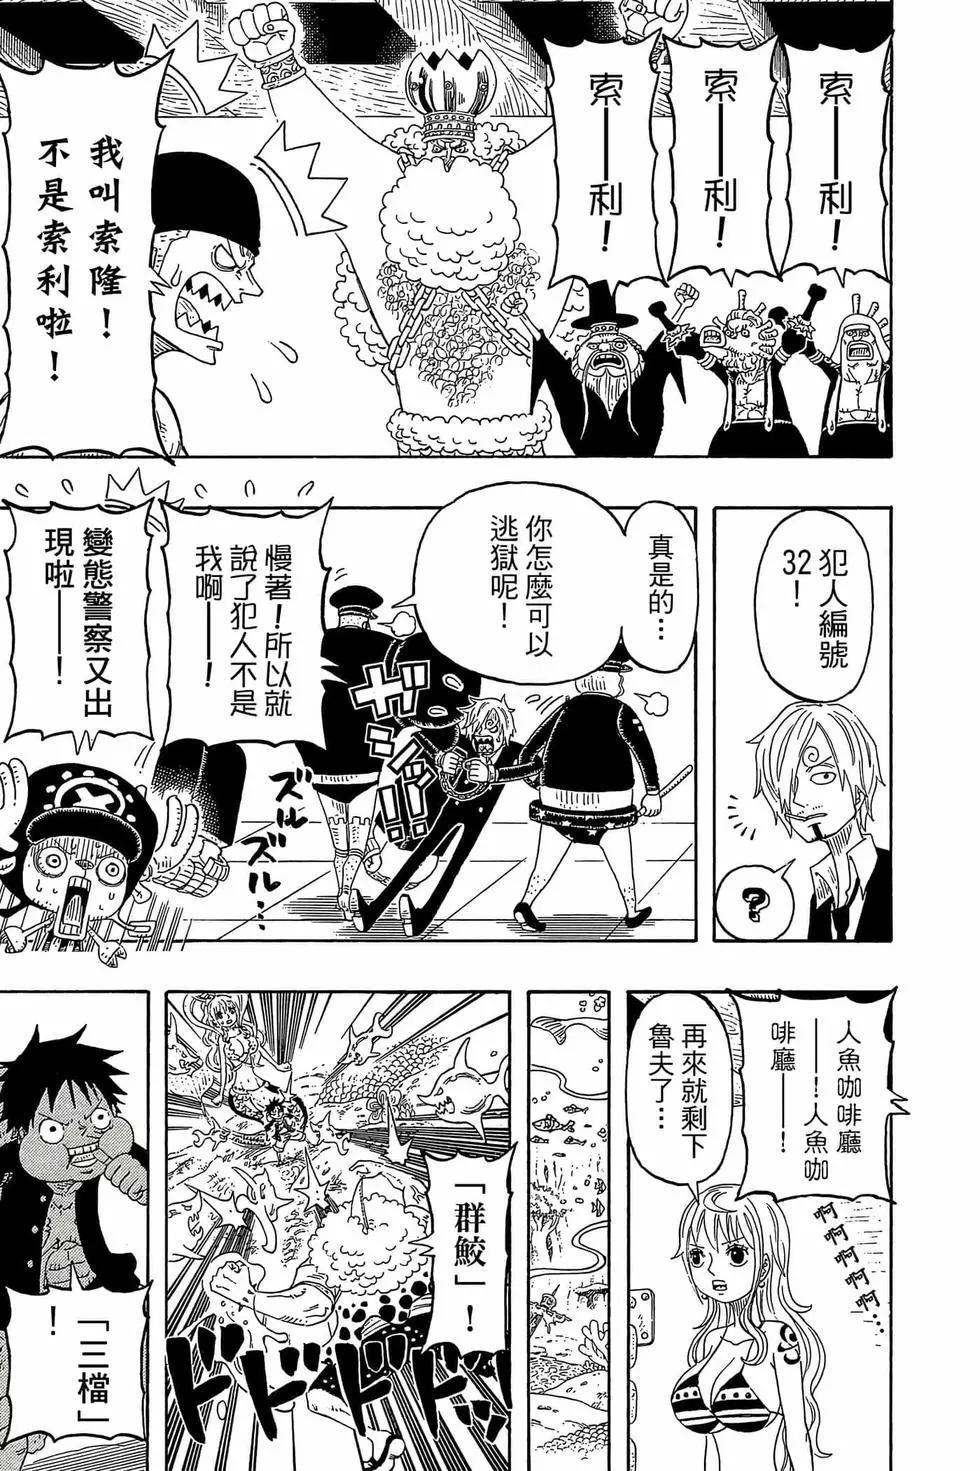 One piece party - 第03卷(2/4) - 4